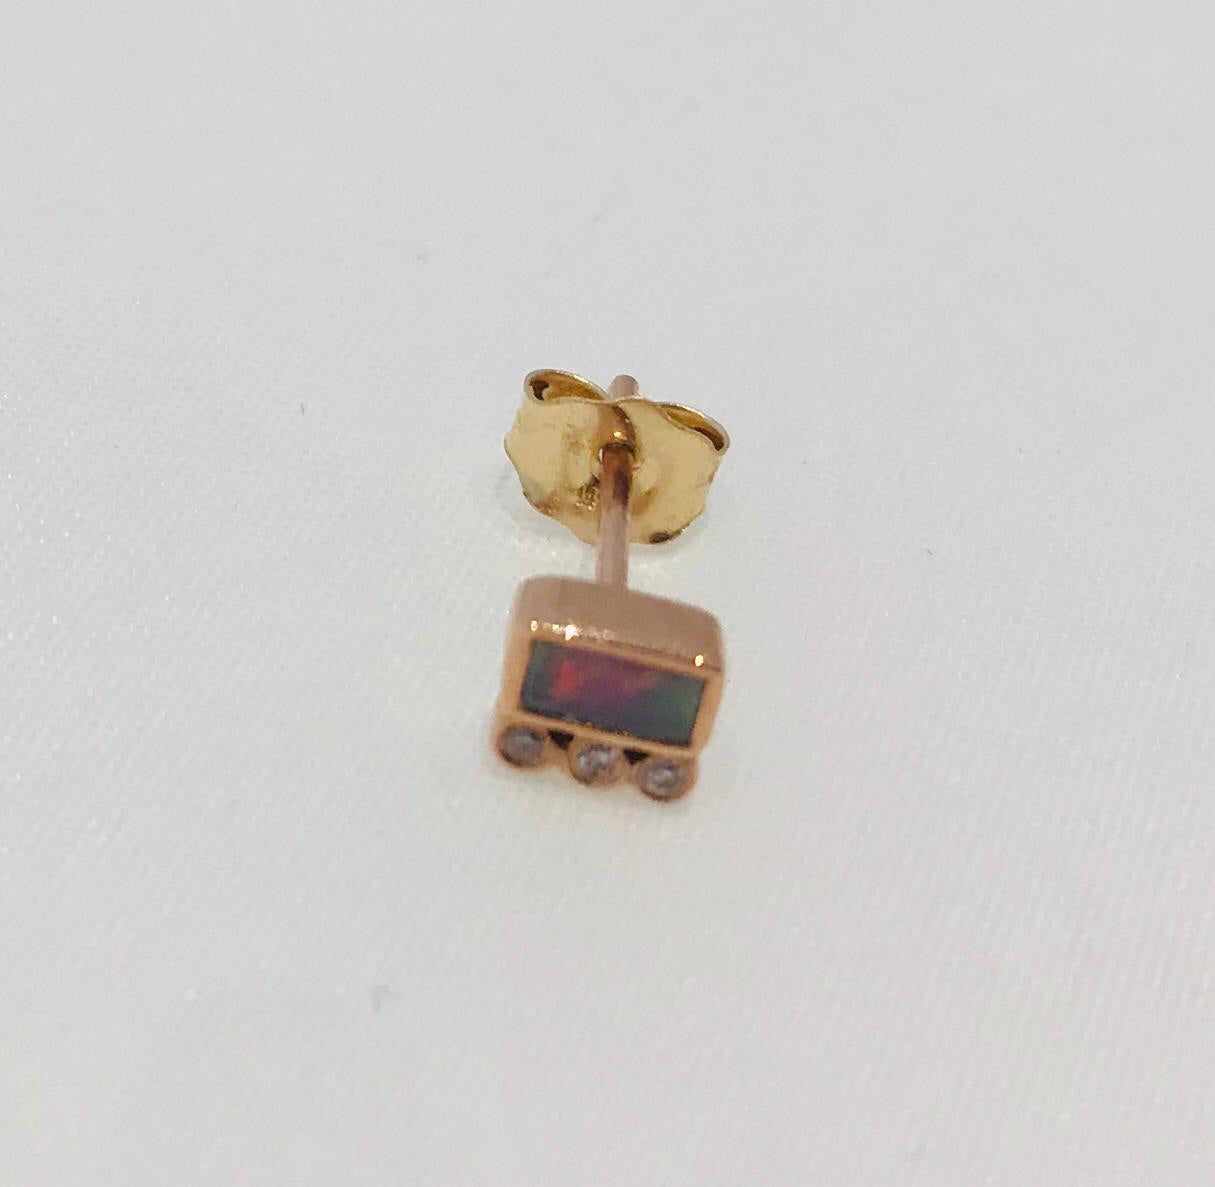 Céline Daoust 14kt pink gold earrings with baguette tourmaline and 3 diamonds. 